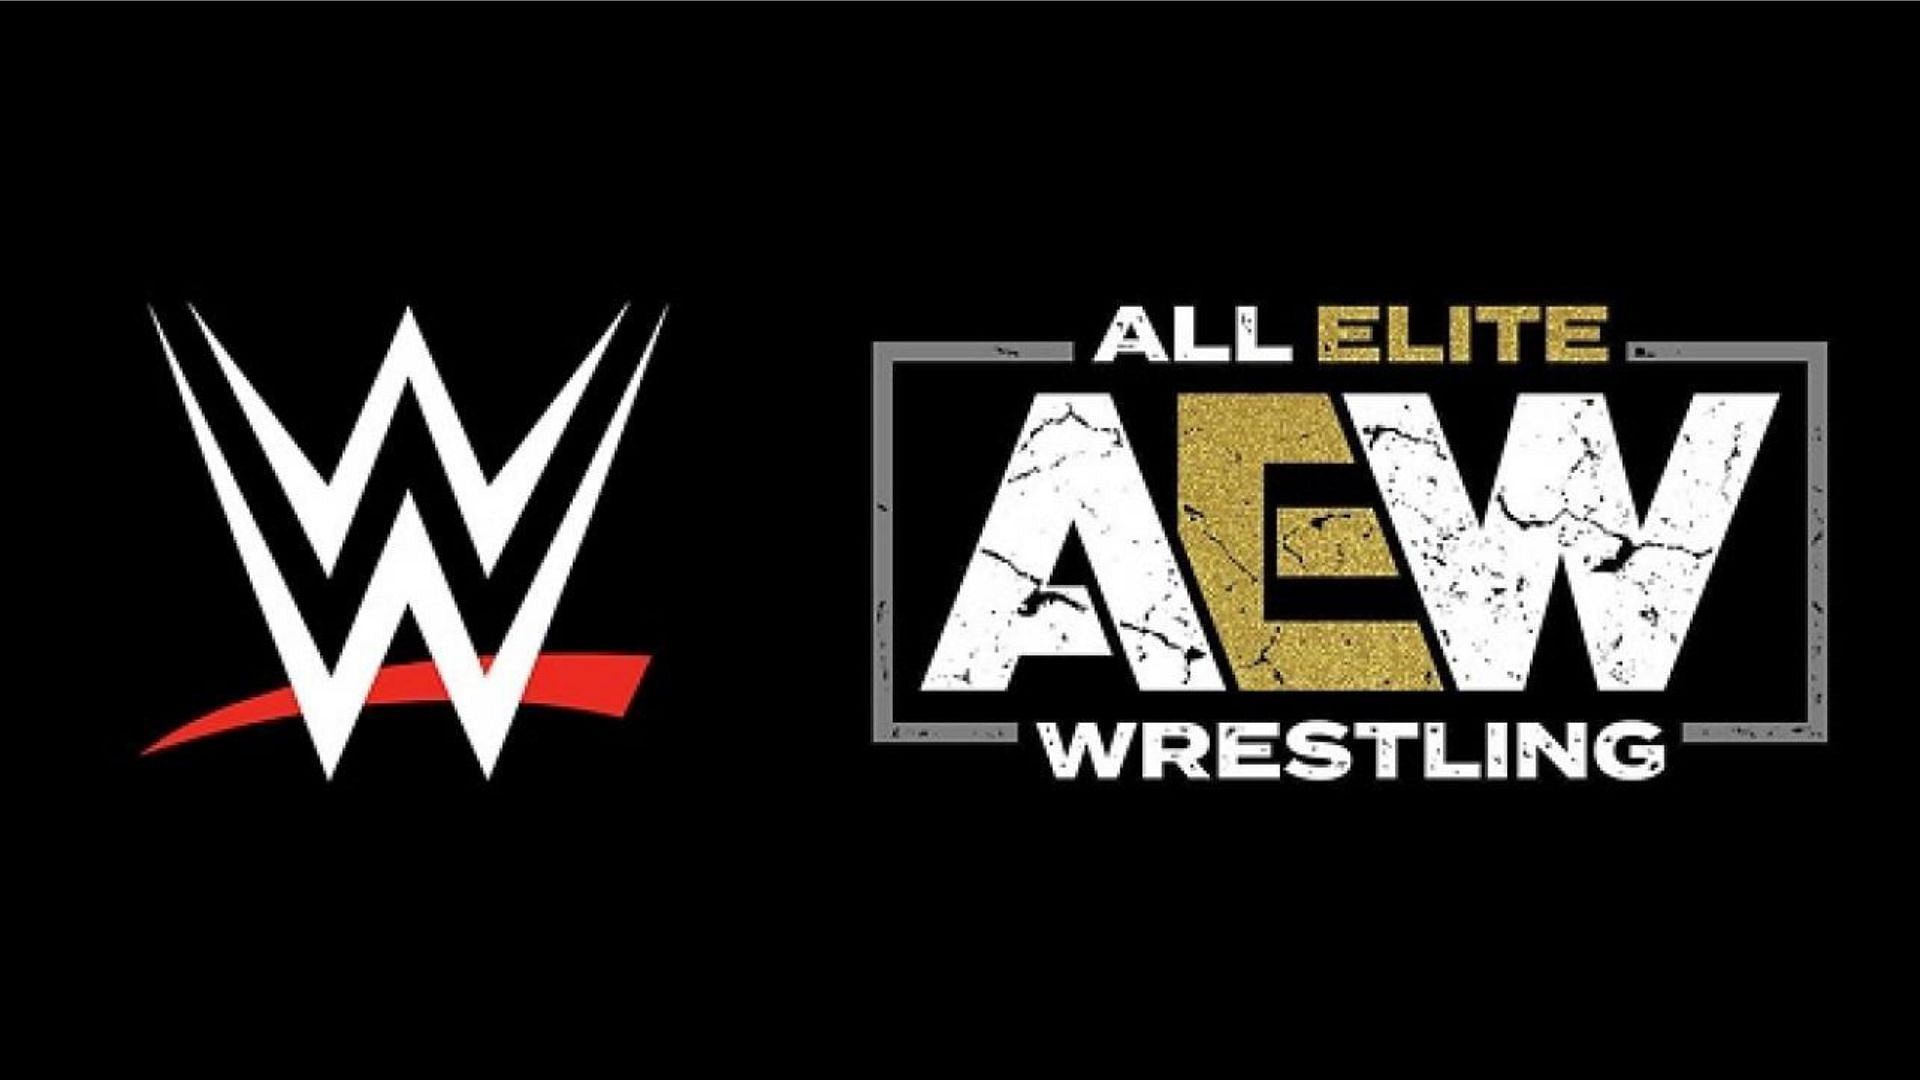 AEW is home to several top stars